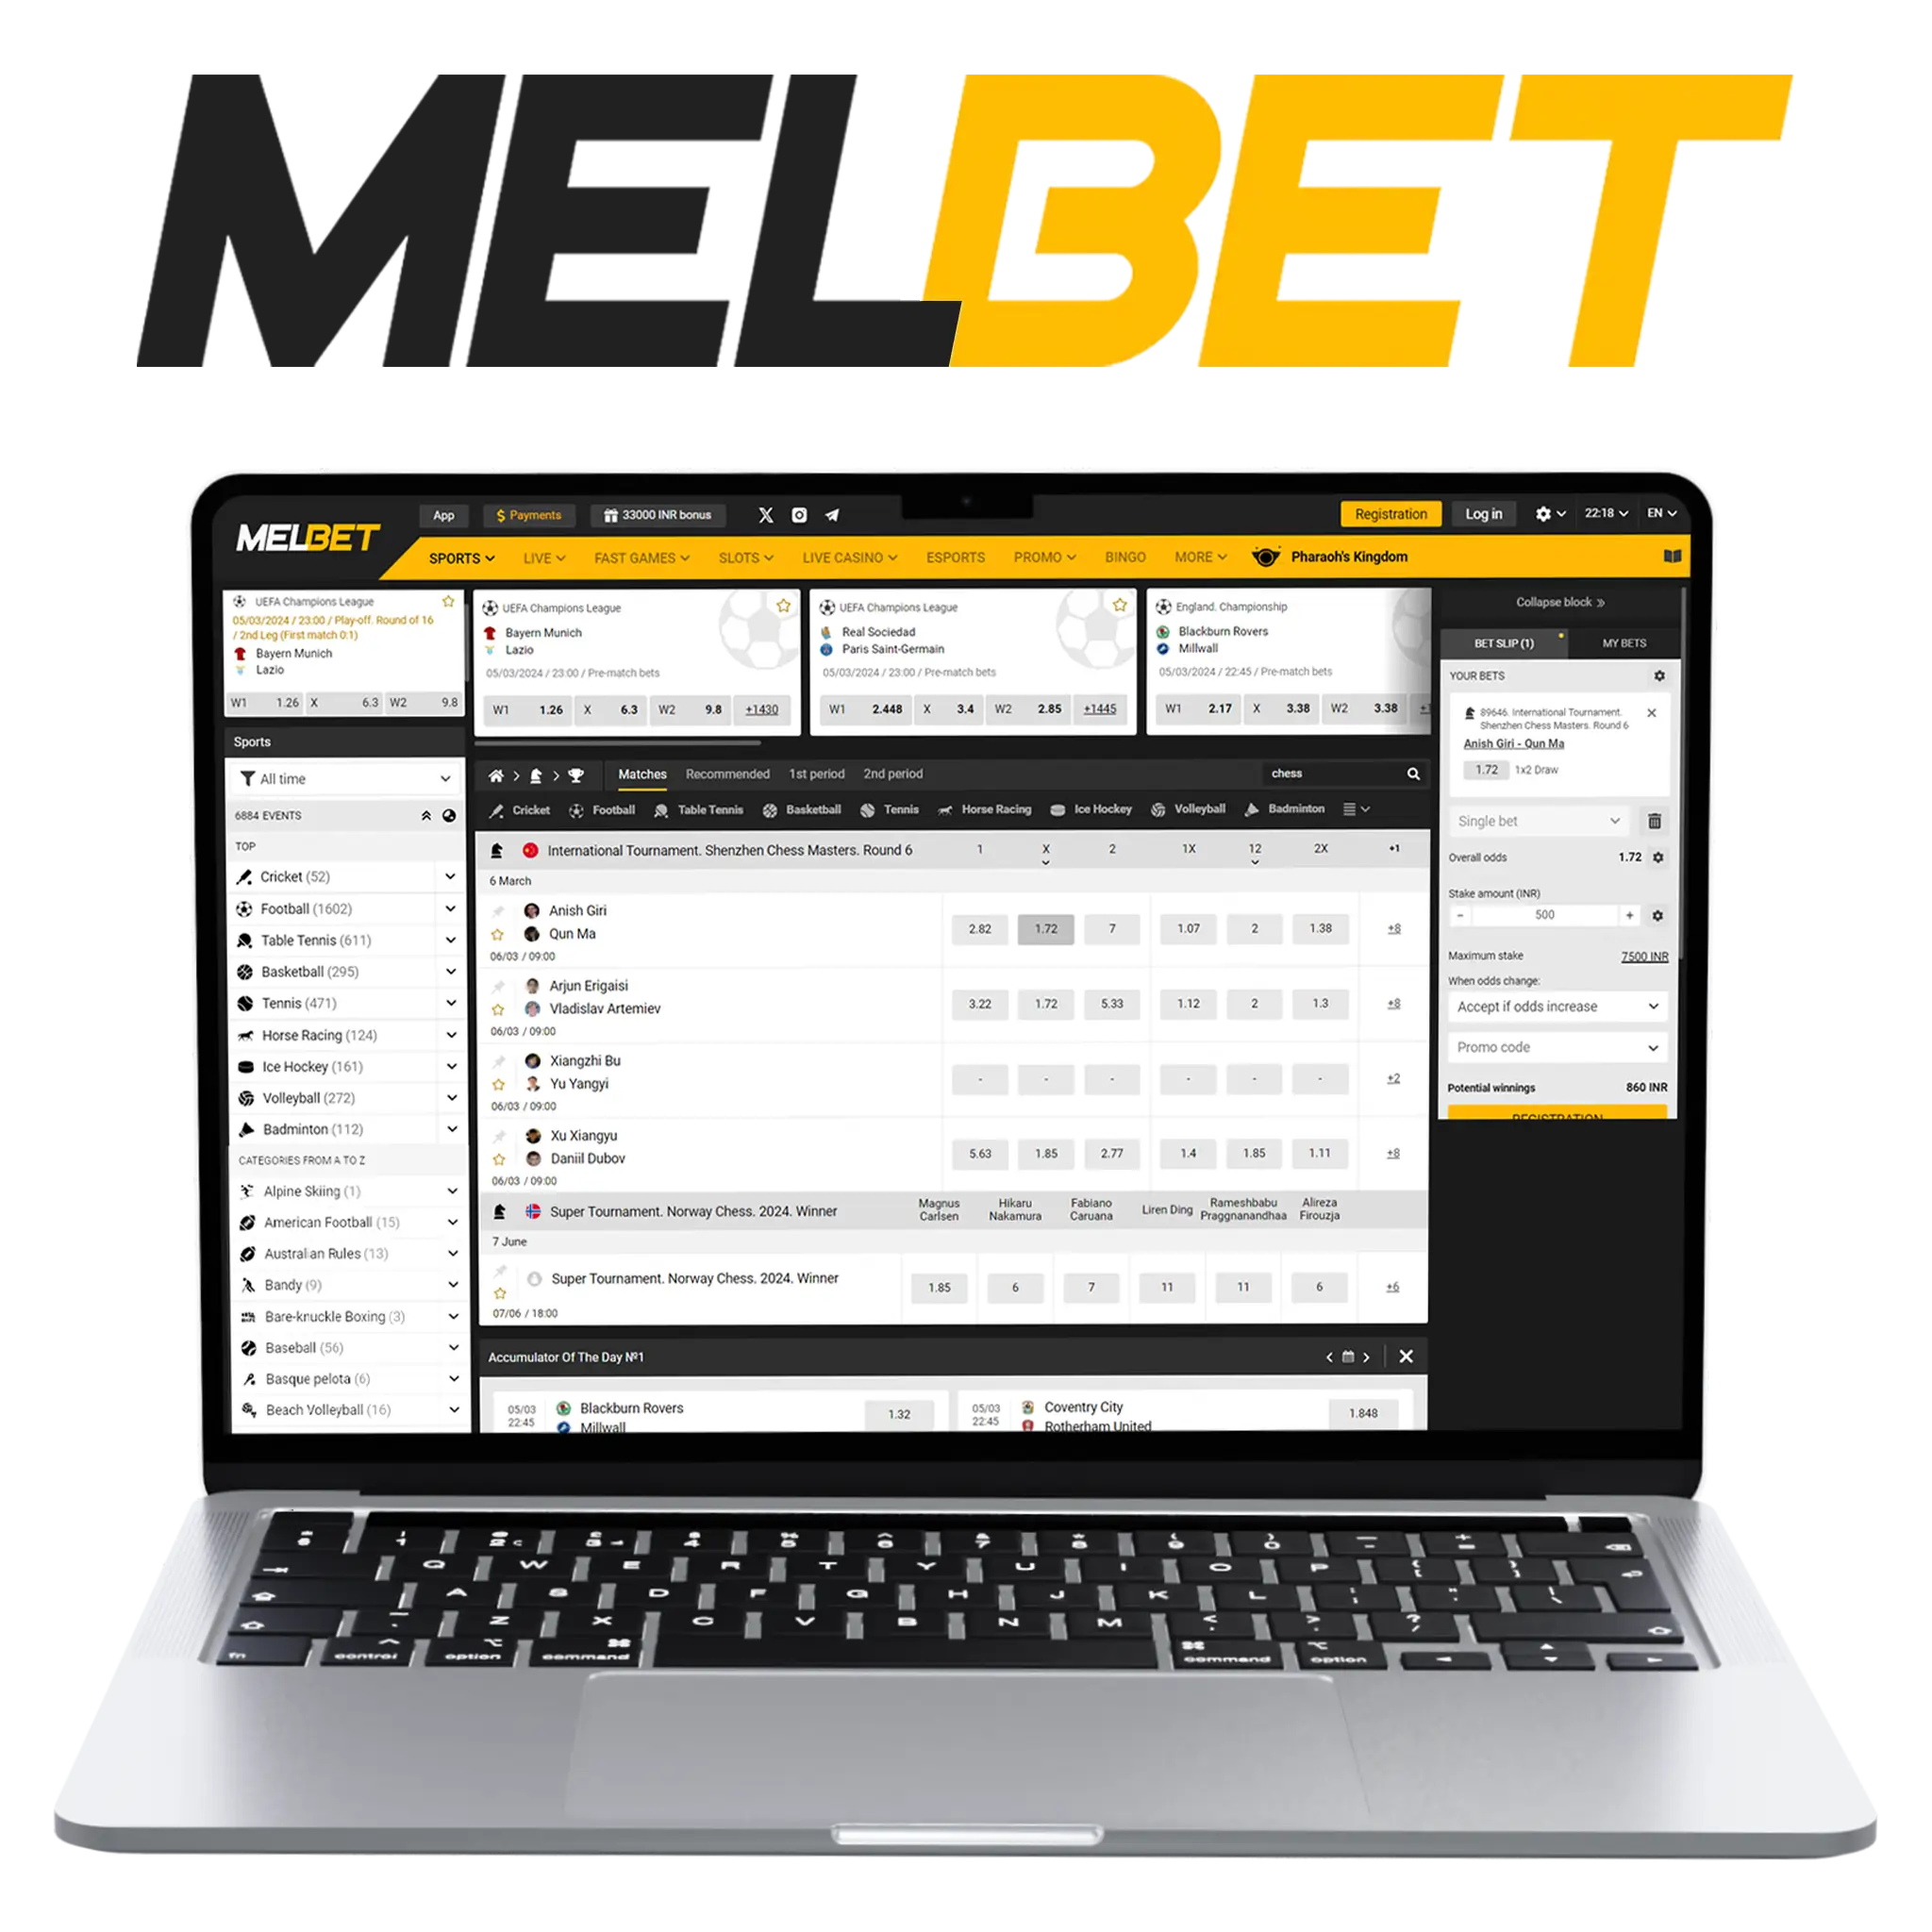 The variety of bonuses and promotions for chess betting is one of the strong points of Melbet.